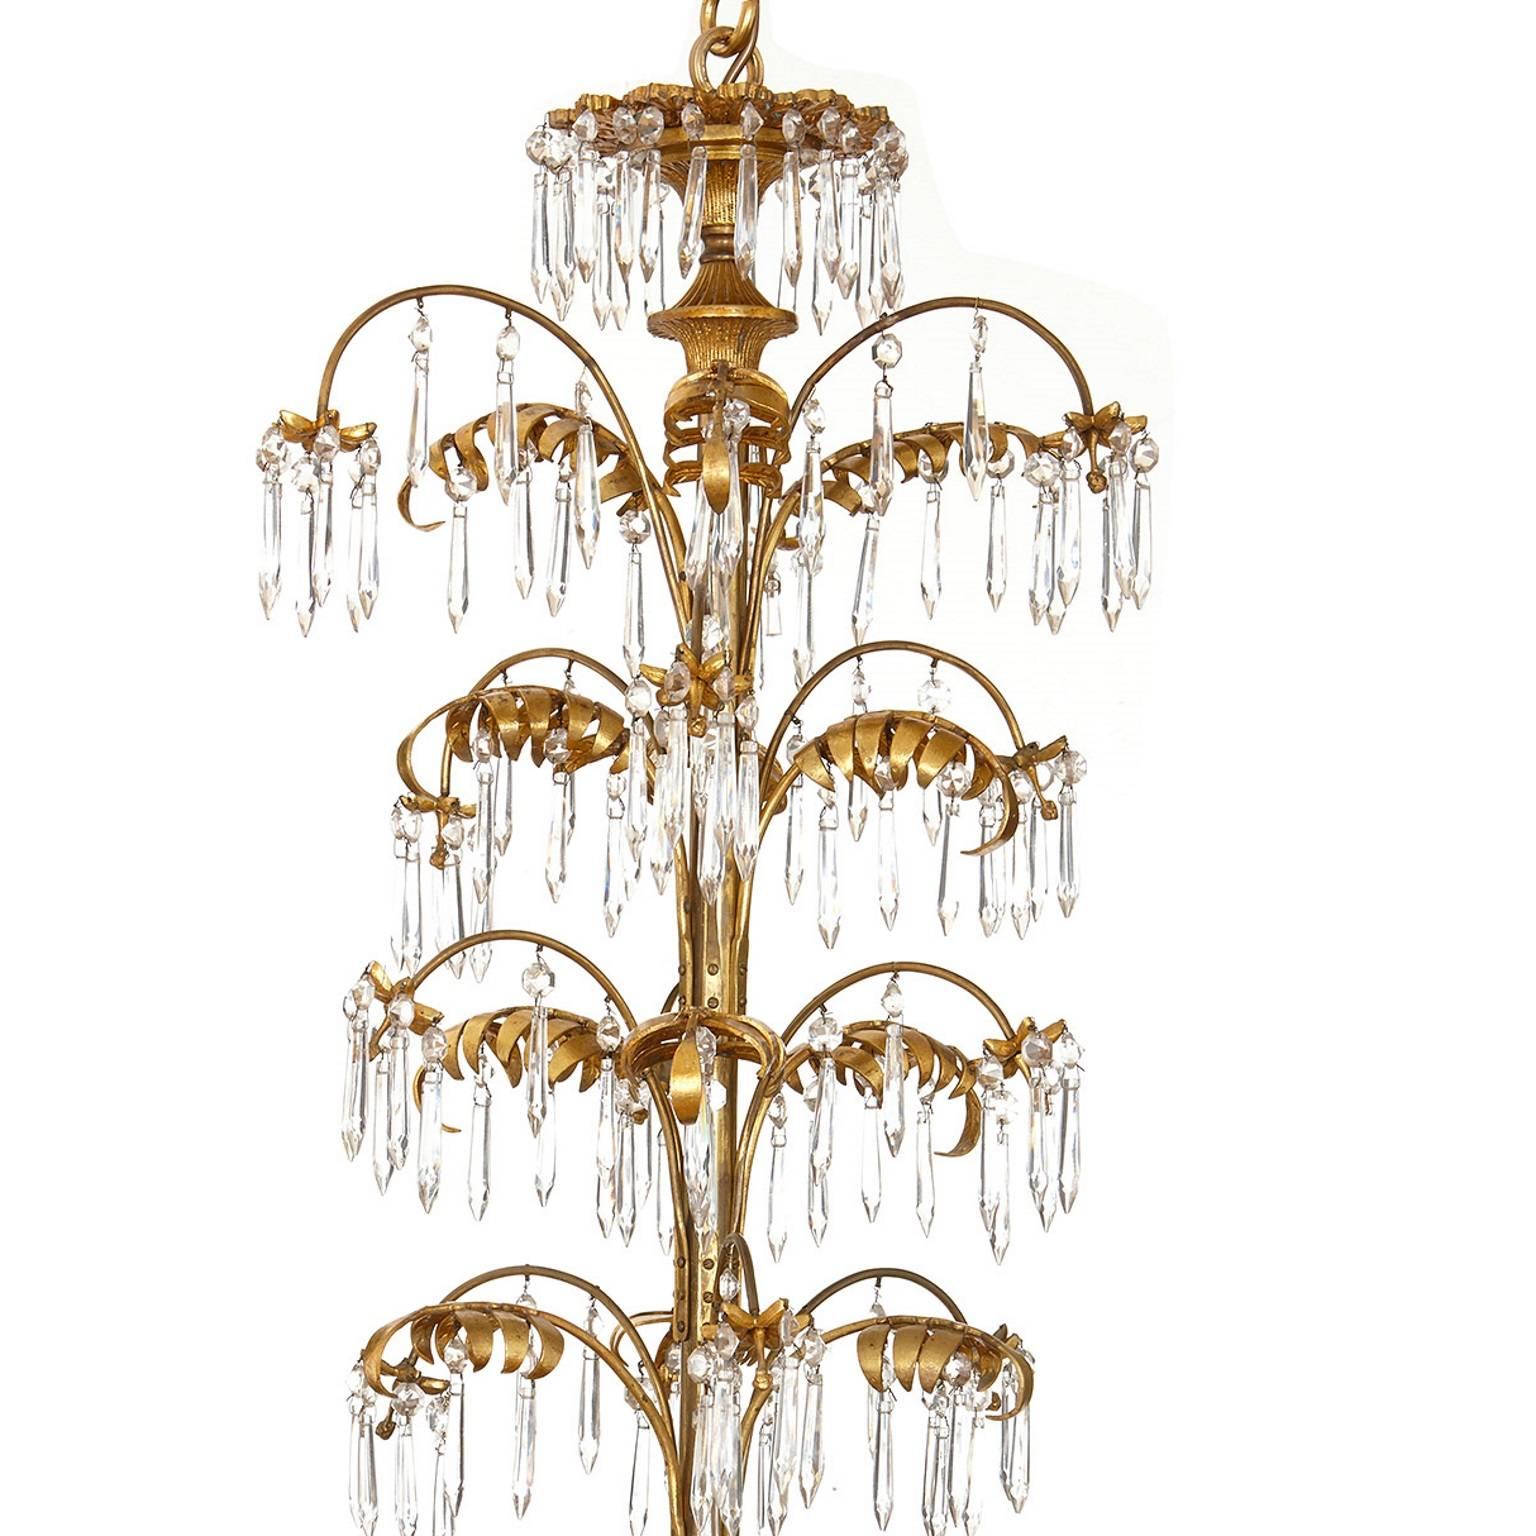 French antique Belle Époque style ormolu and cut-glass twelve-light chandelier
French, c. 1880
Height 120cm, diameter 70cm 

The opulent yet refined design of this stunning chandelier is synonymous with the French Belle Époque style popular at the